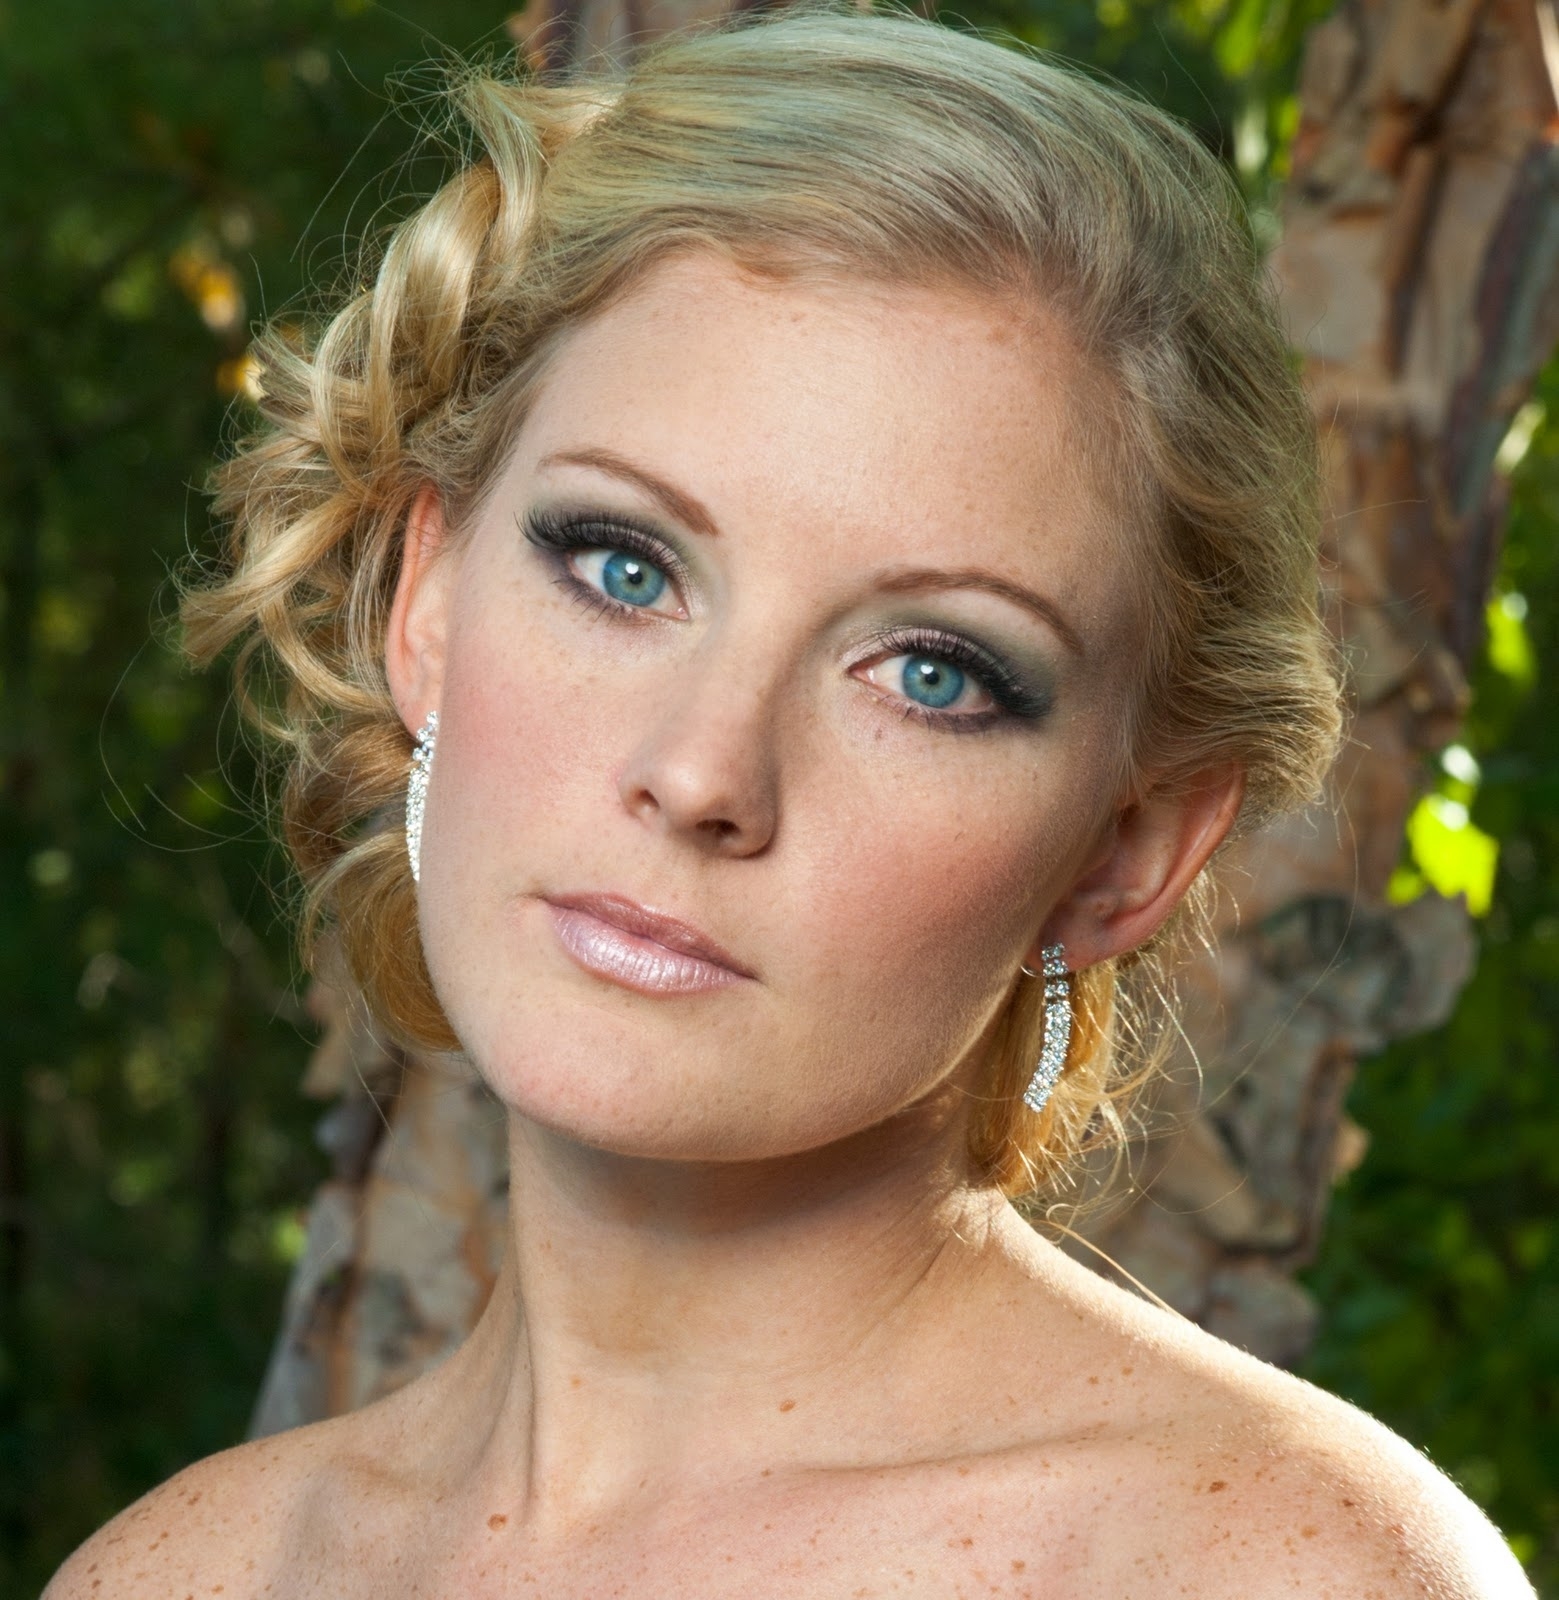 Wedding Makeup Tips For Blue-Eyed Brides With Blond Hair | Bride Sparkle with regard to Makeup Tips For Blue Eyes And Blonde Hair And Fair Skin